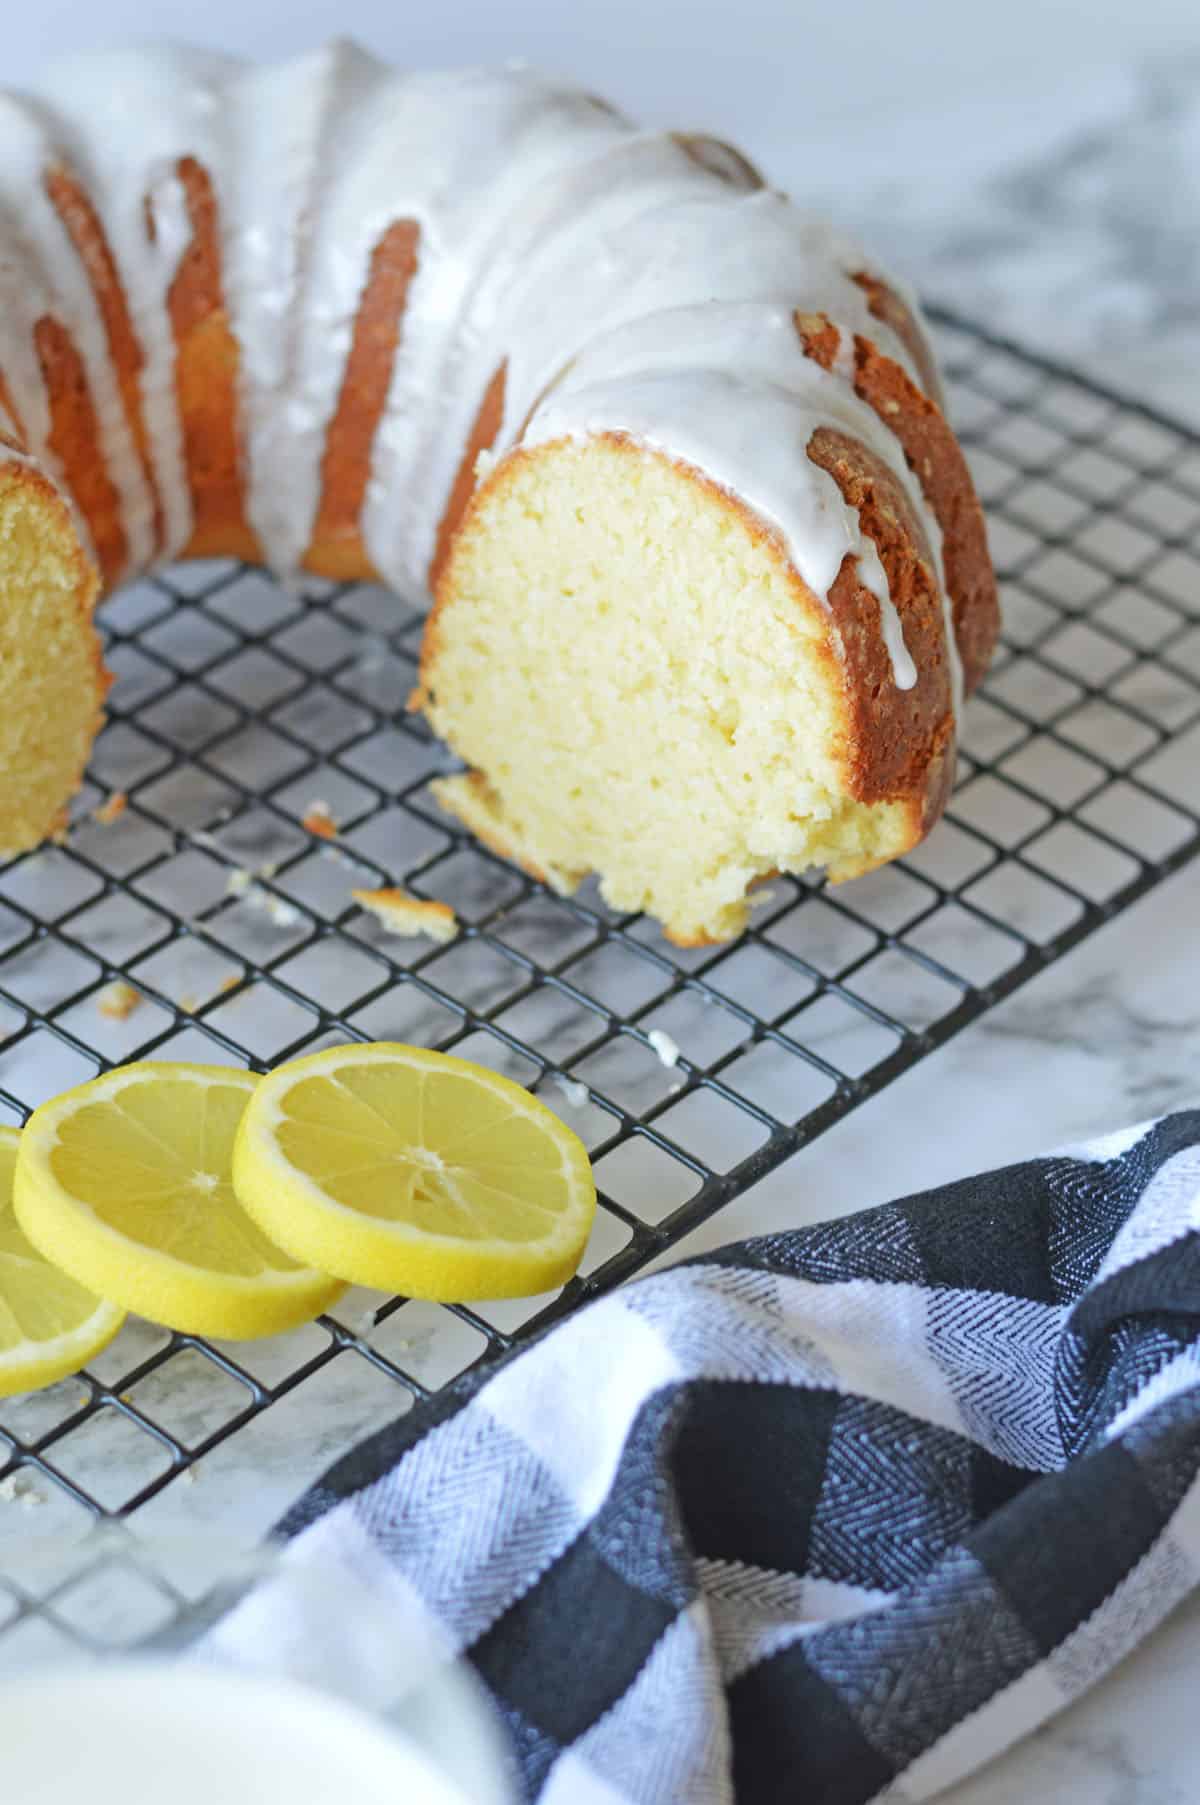 Part of a lemon pound cake on a wire rack.